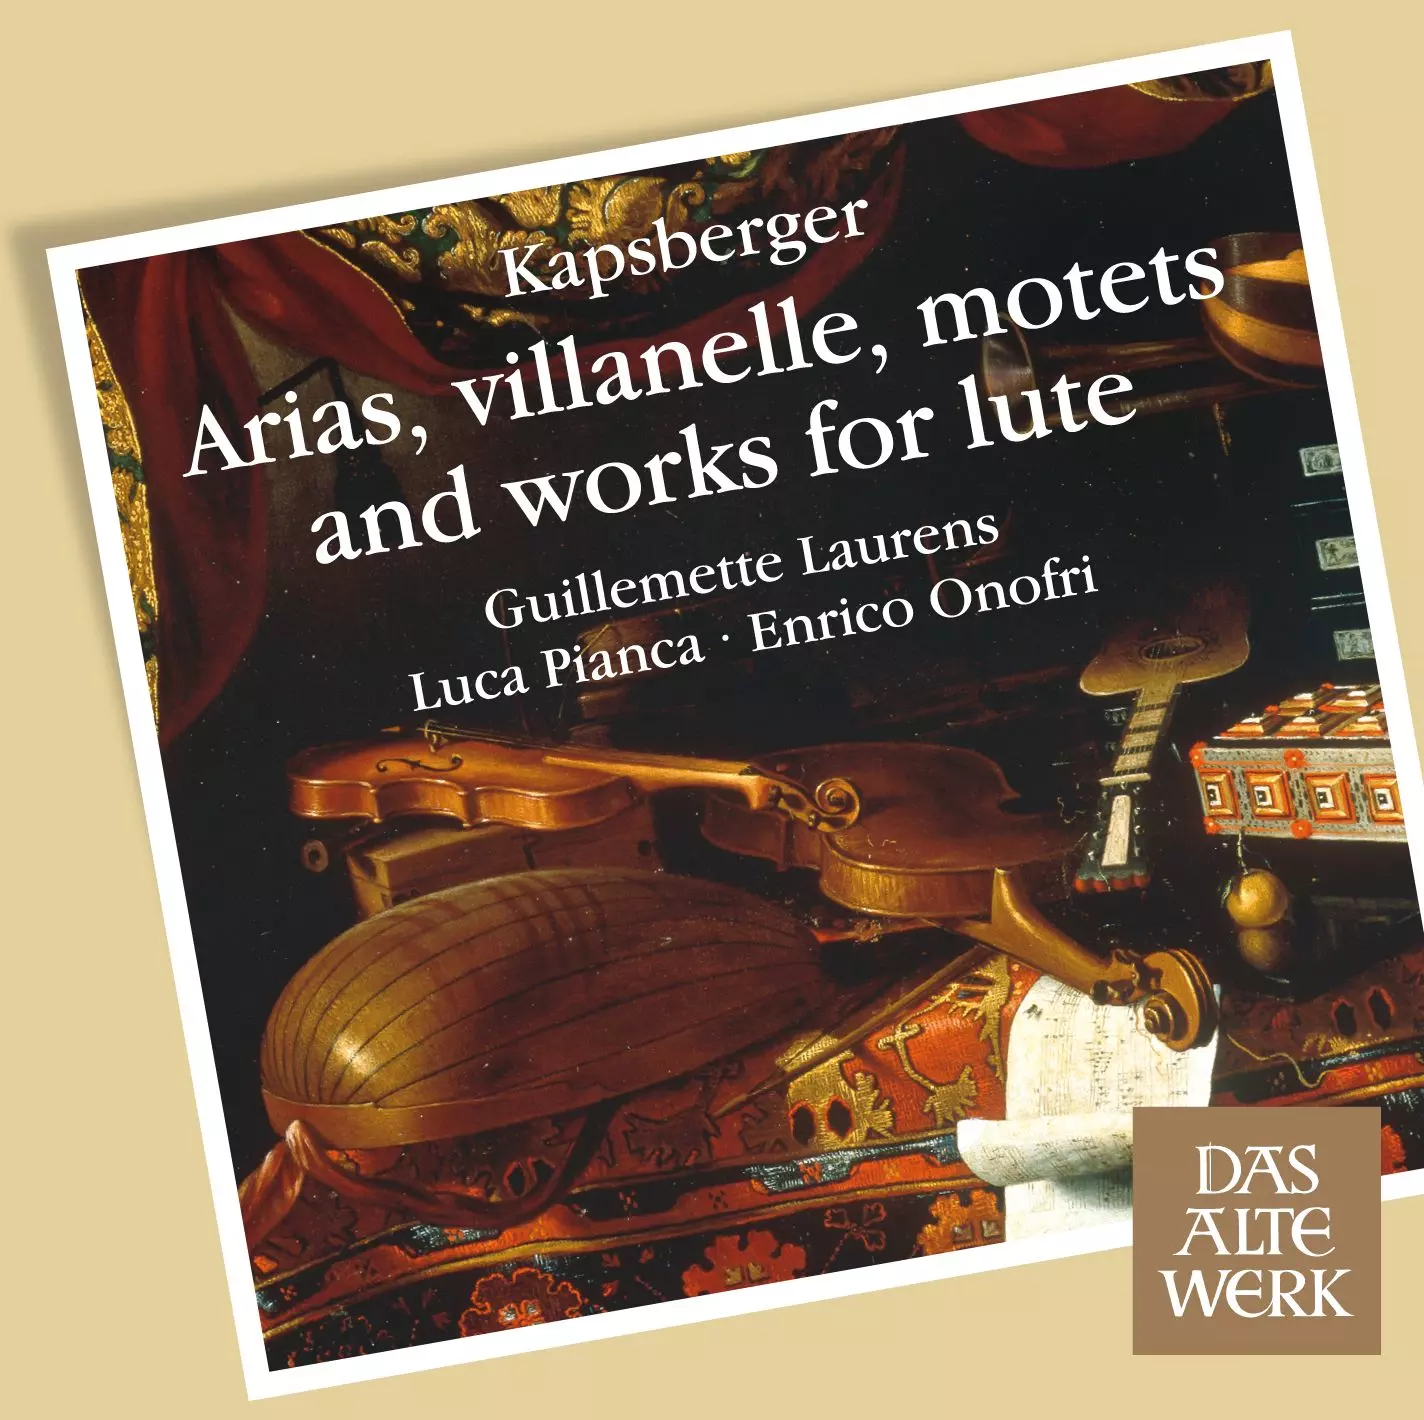 Arias, villanelle, motets and works for lute